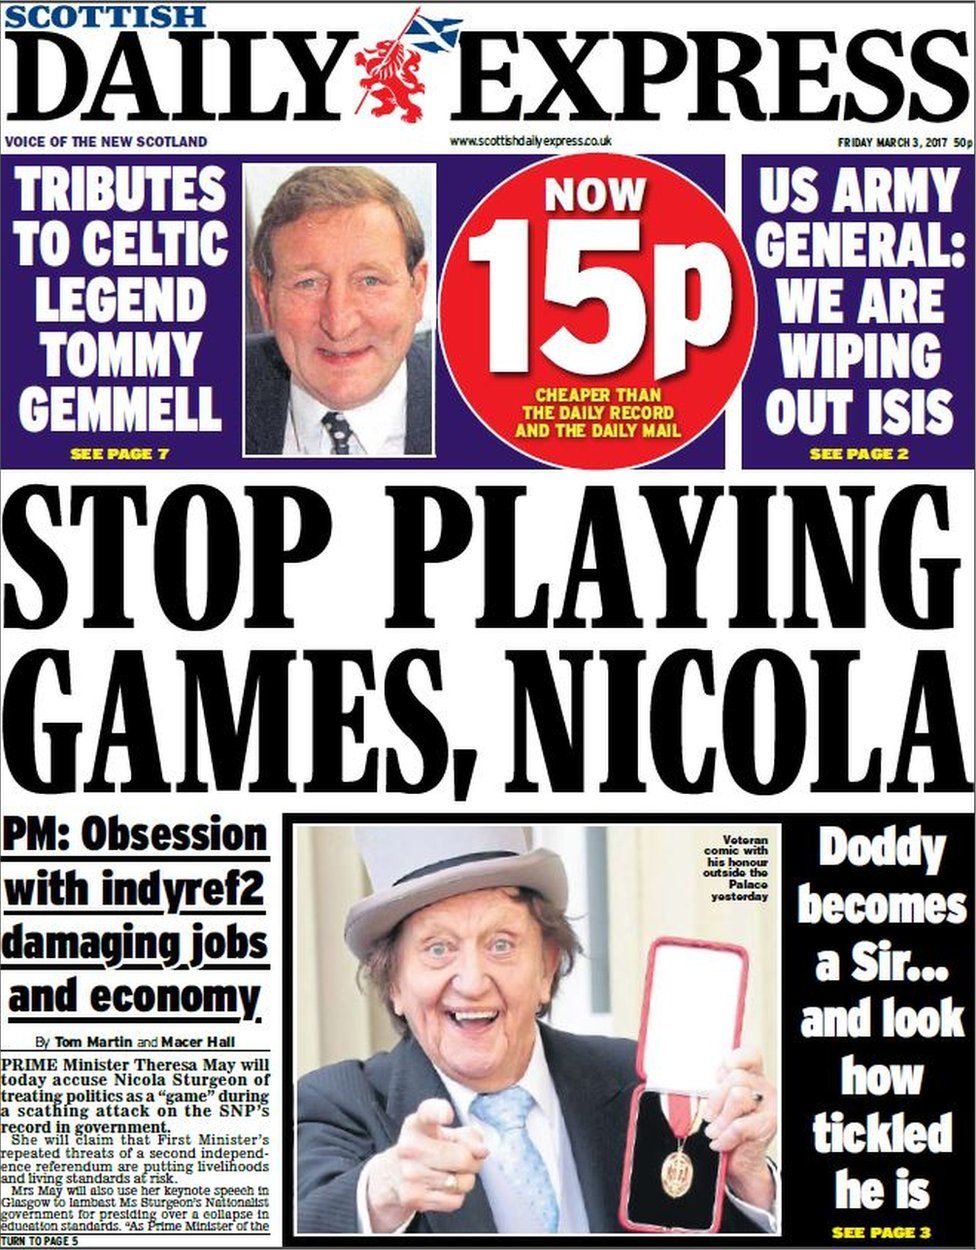 Scotland's papers: Sturgeon's 'game' and Celtic's Lionheart - BBC News